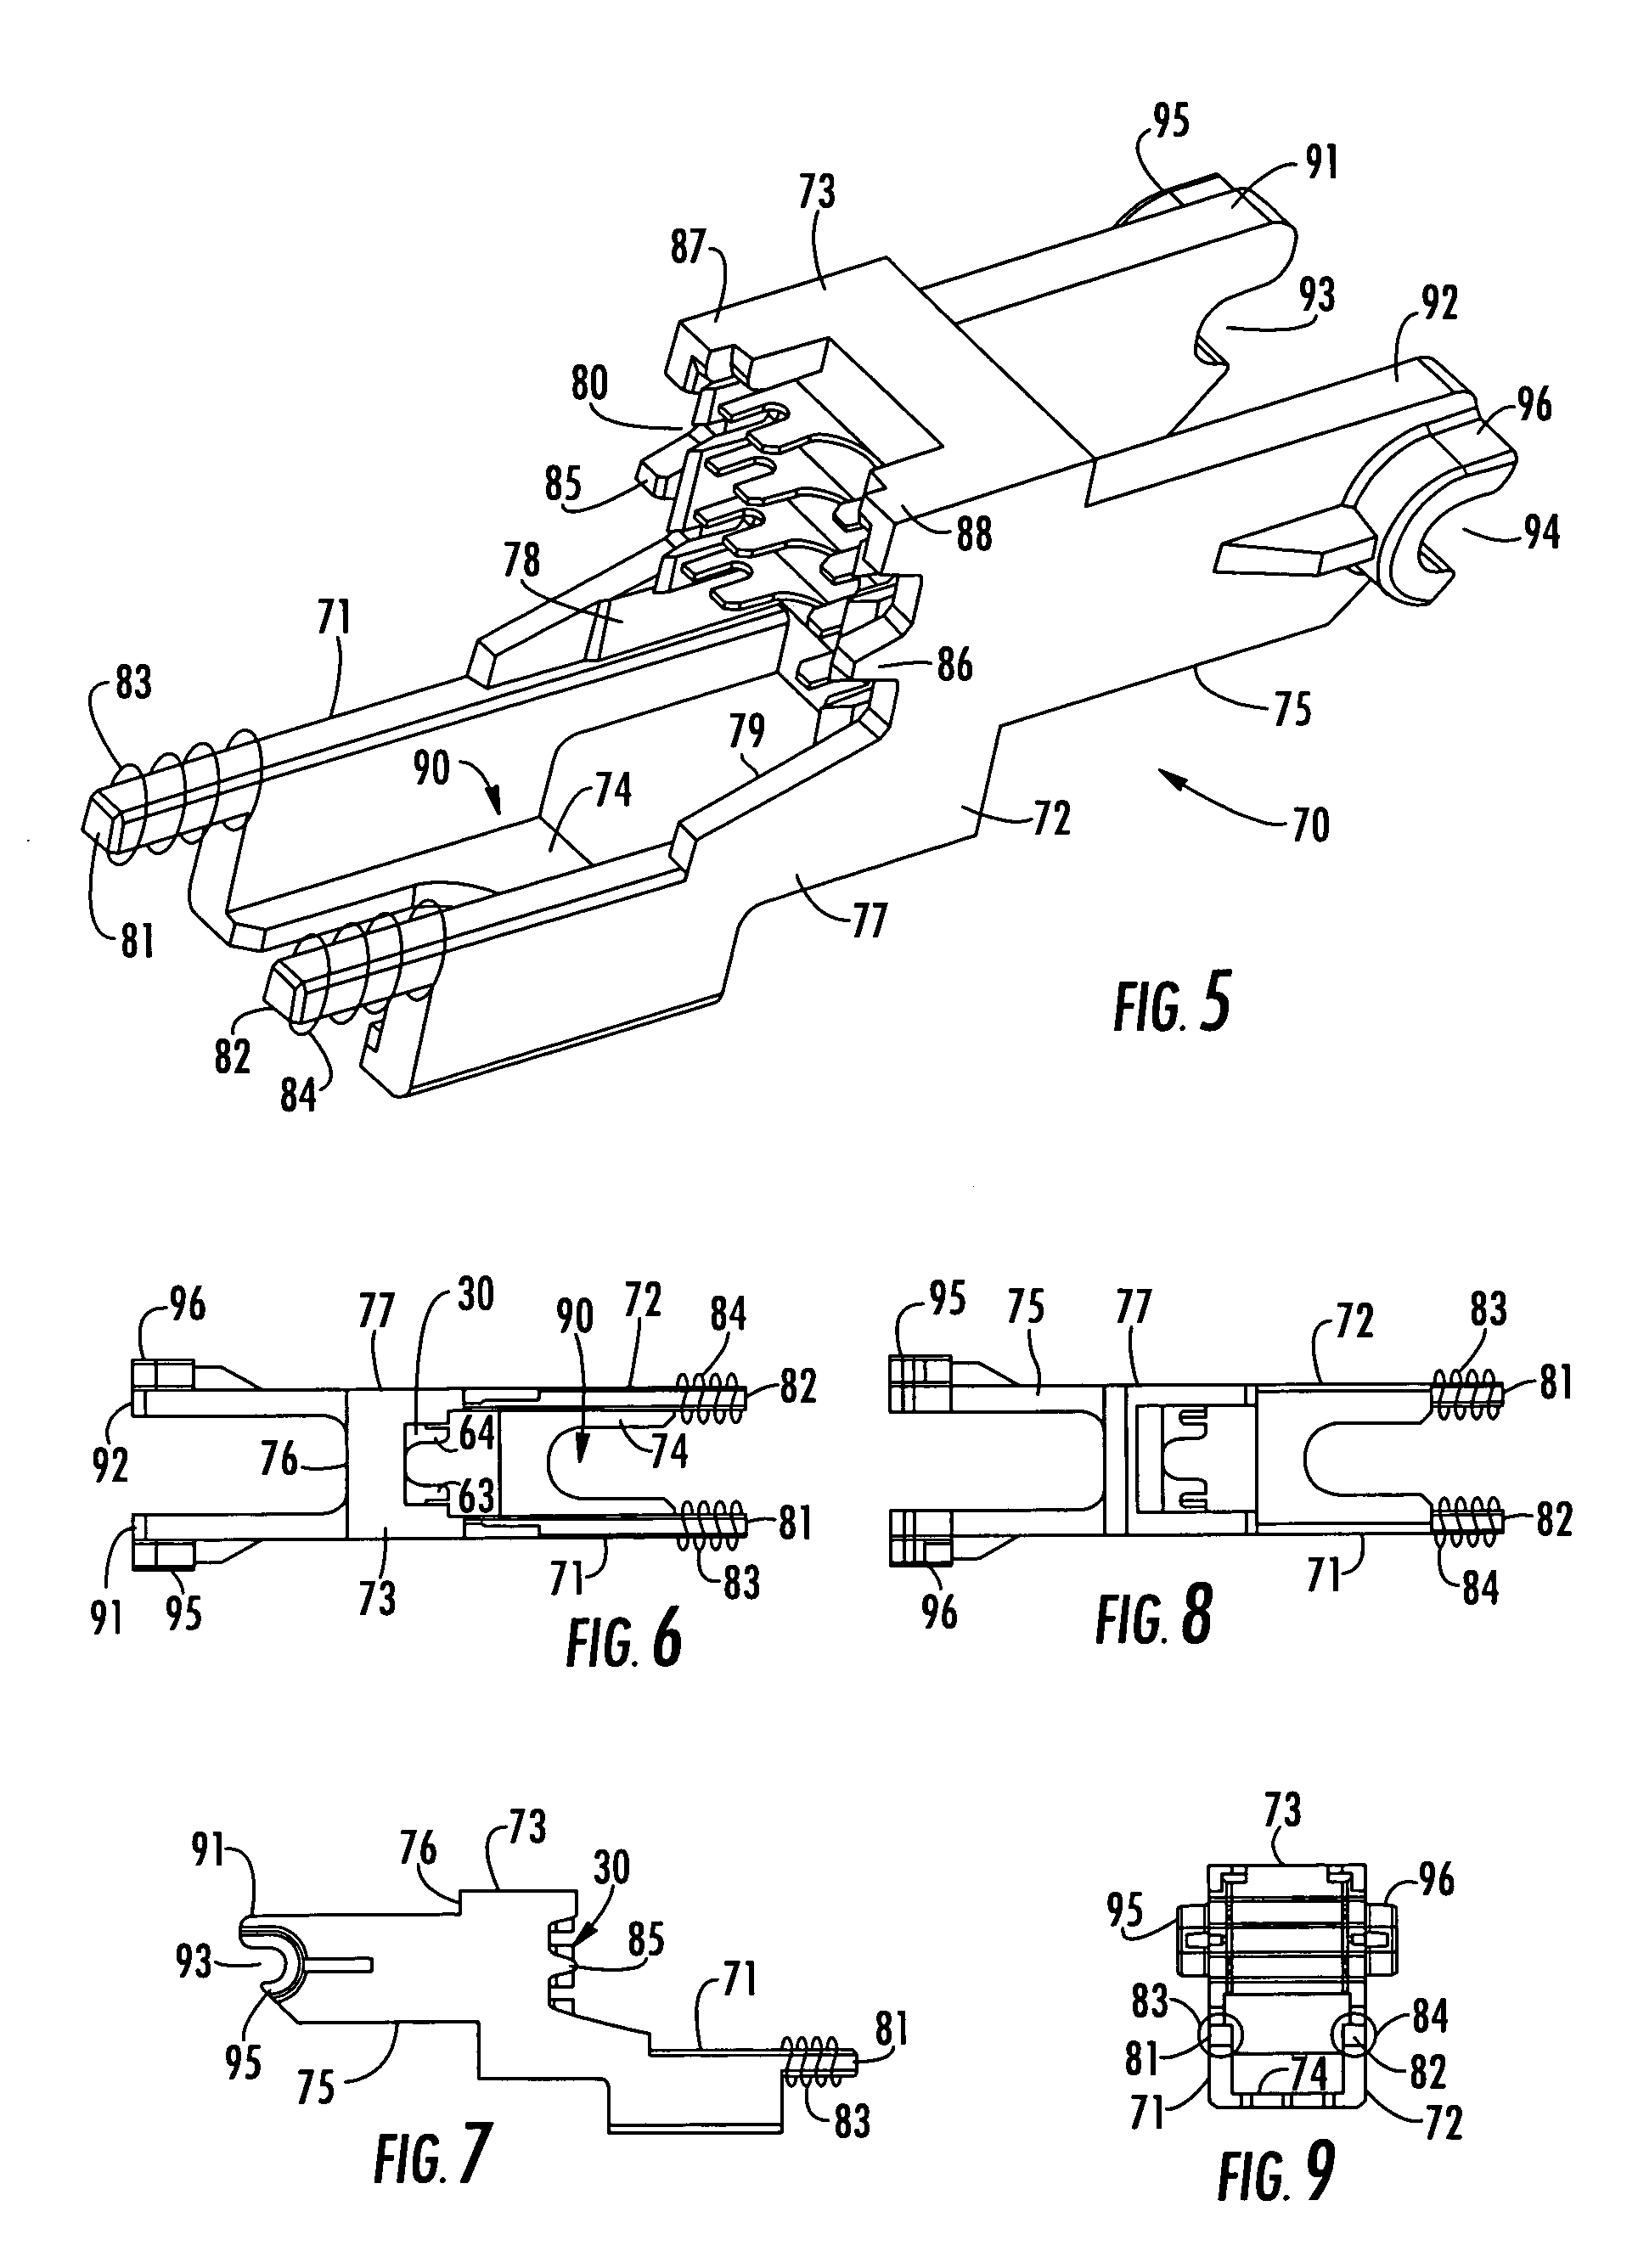 Multiple-wire termination tool with translatable jack and cutting blade precision alignment carrier